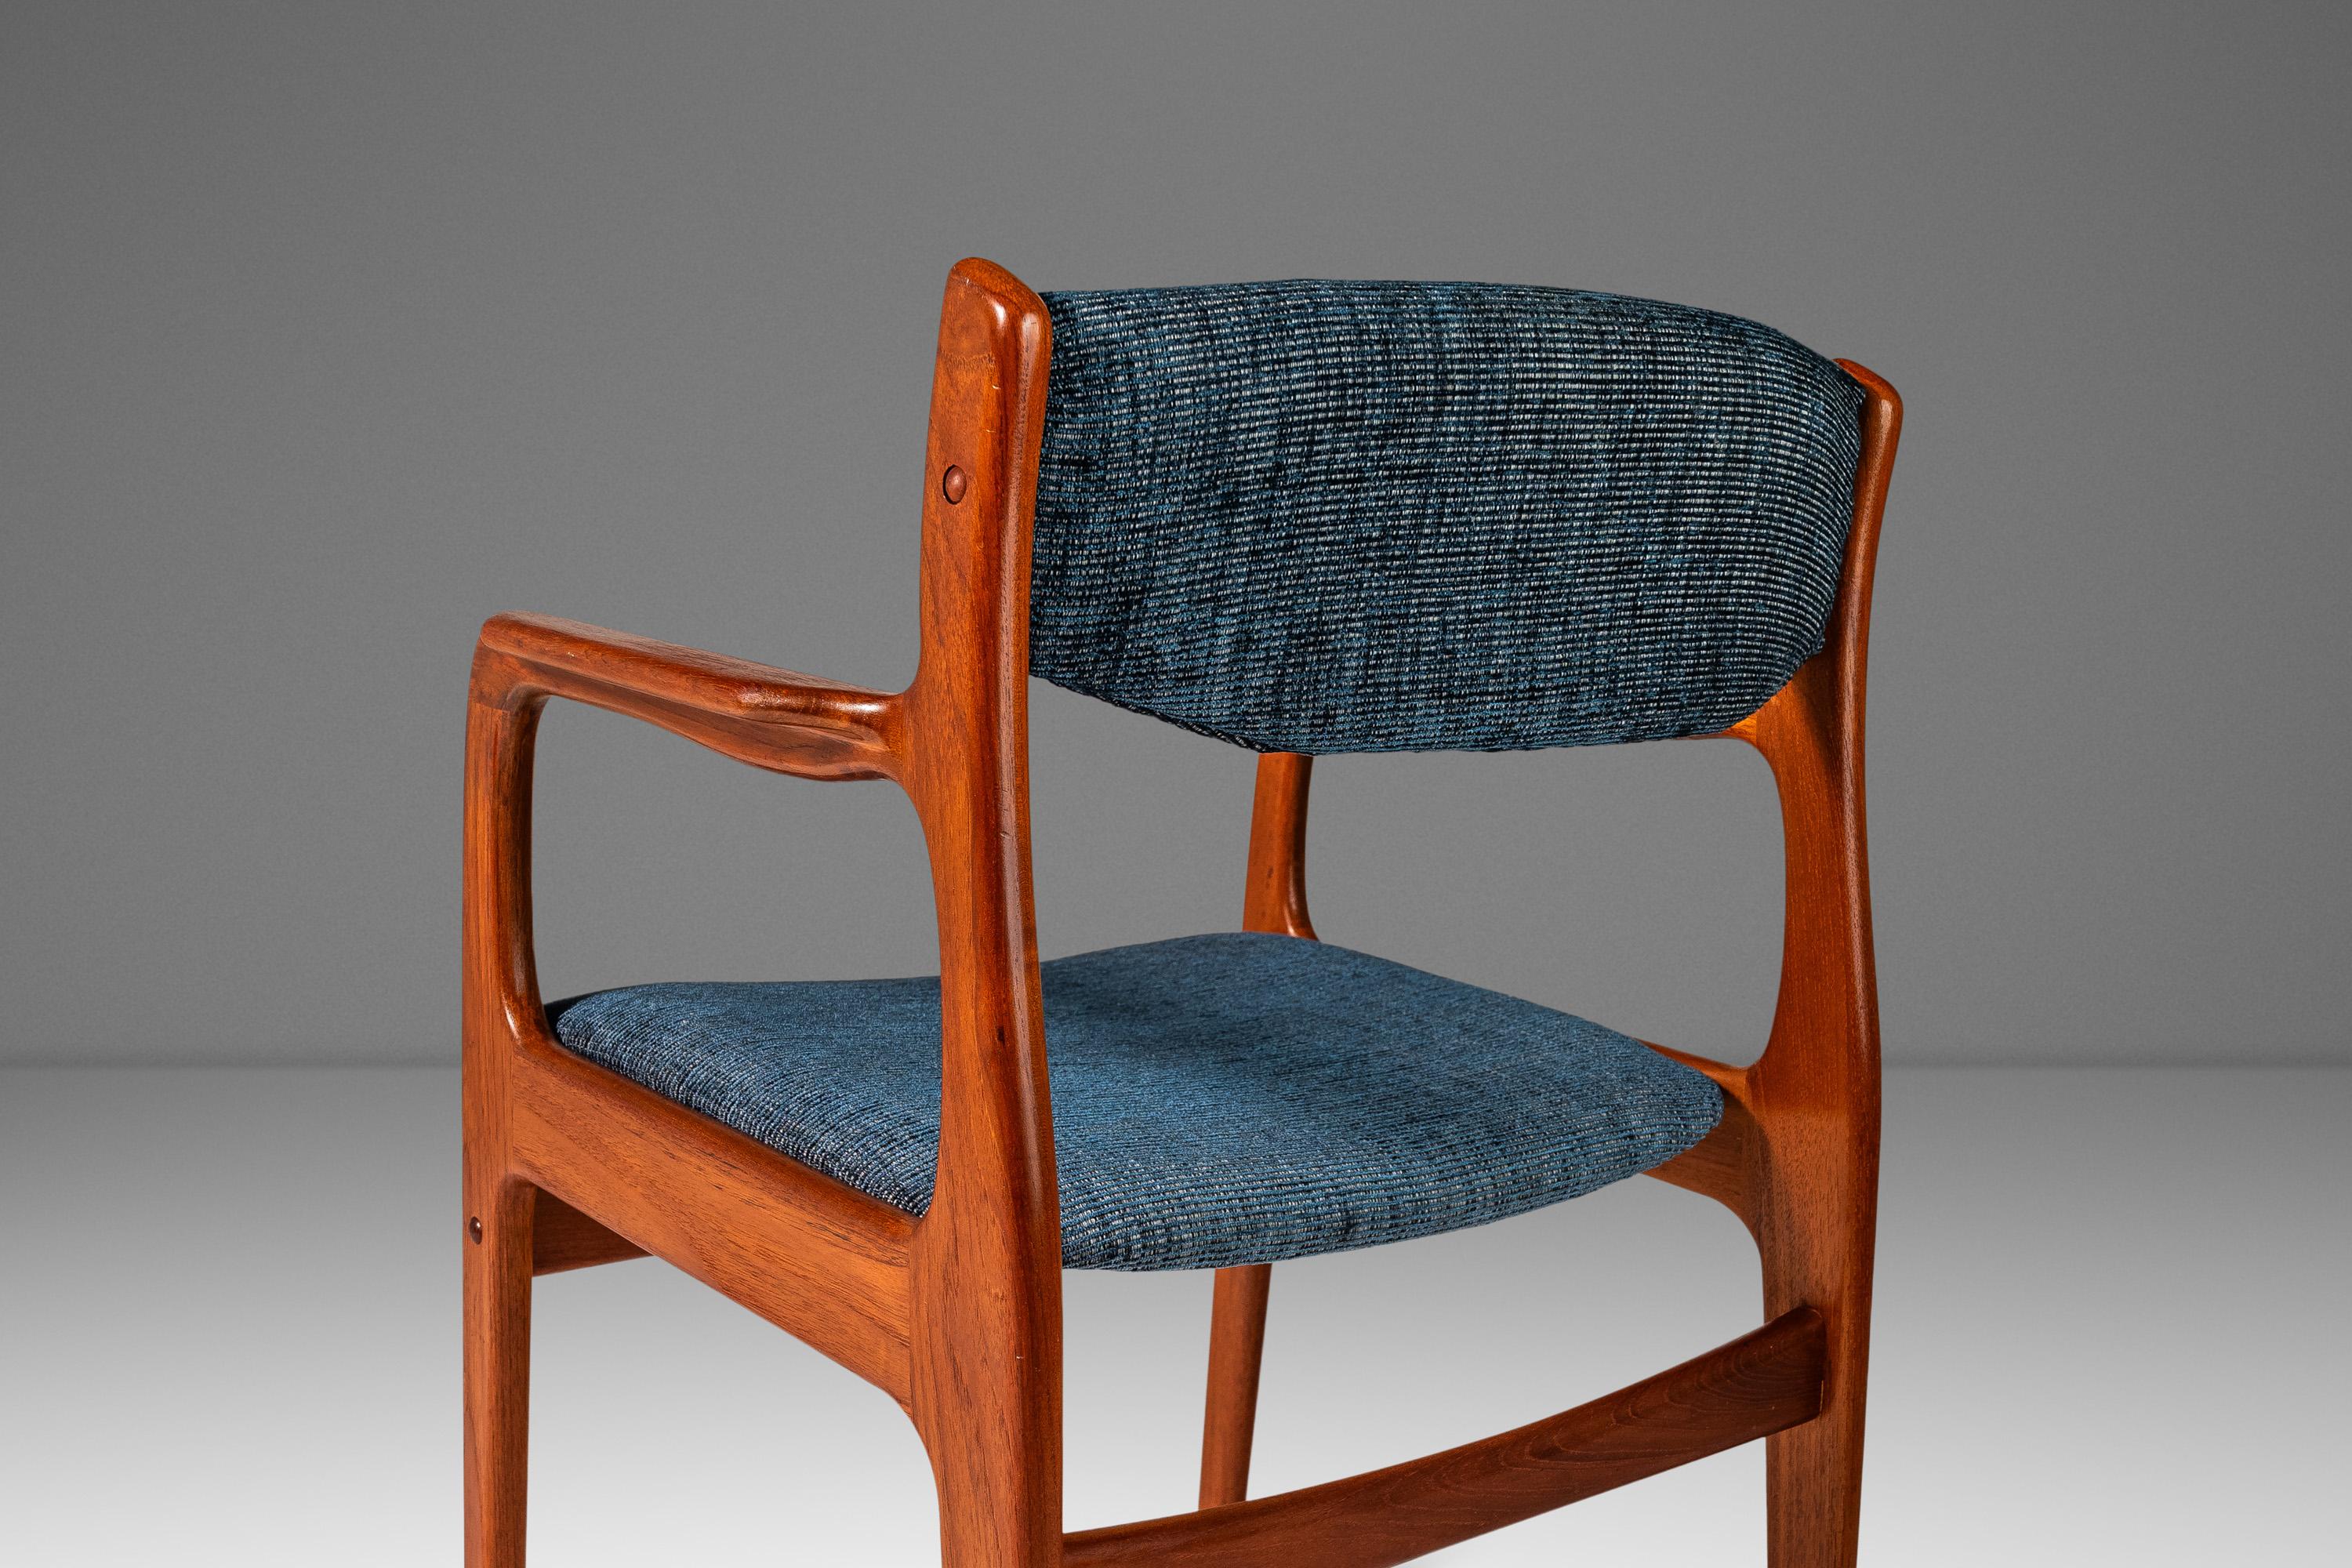 Arm Chair in Solid Teak and New Upholstery by Benny Linden Designs, c. 1970s For Sale 7